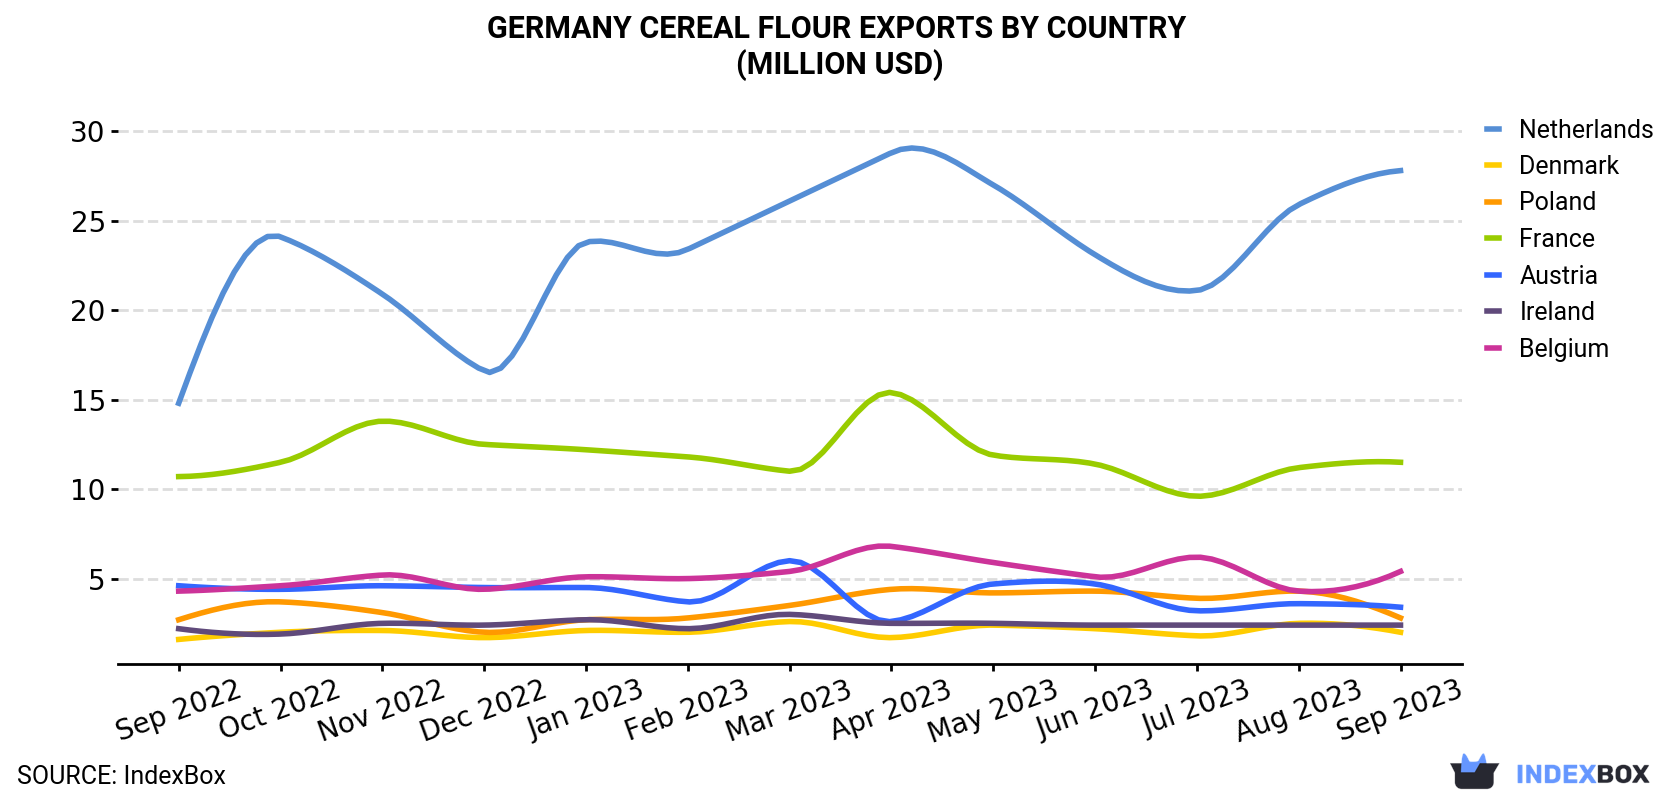 Germany Cereal Flour Exports By Country (Million USD)